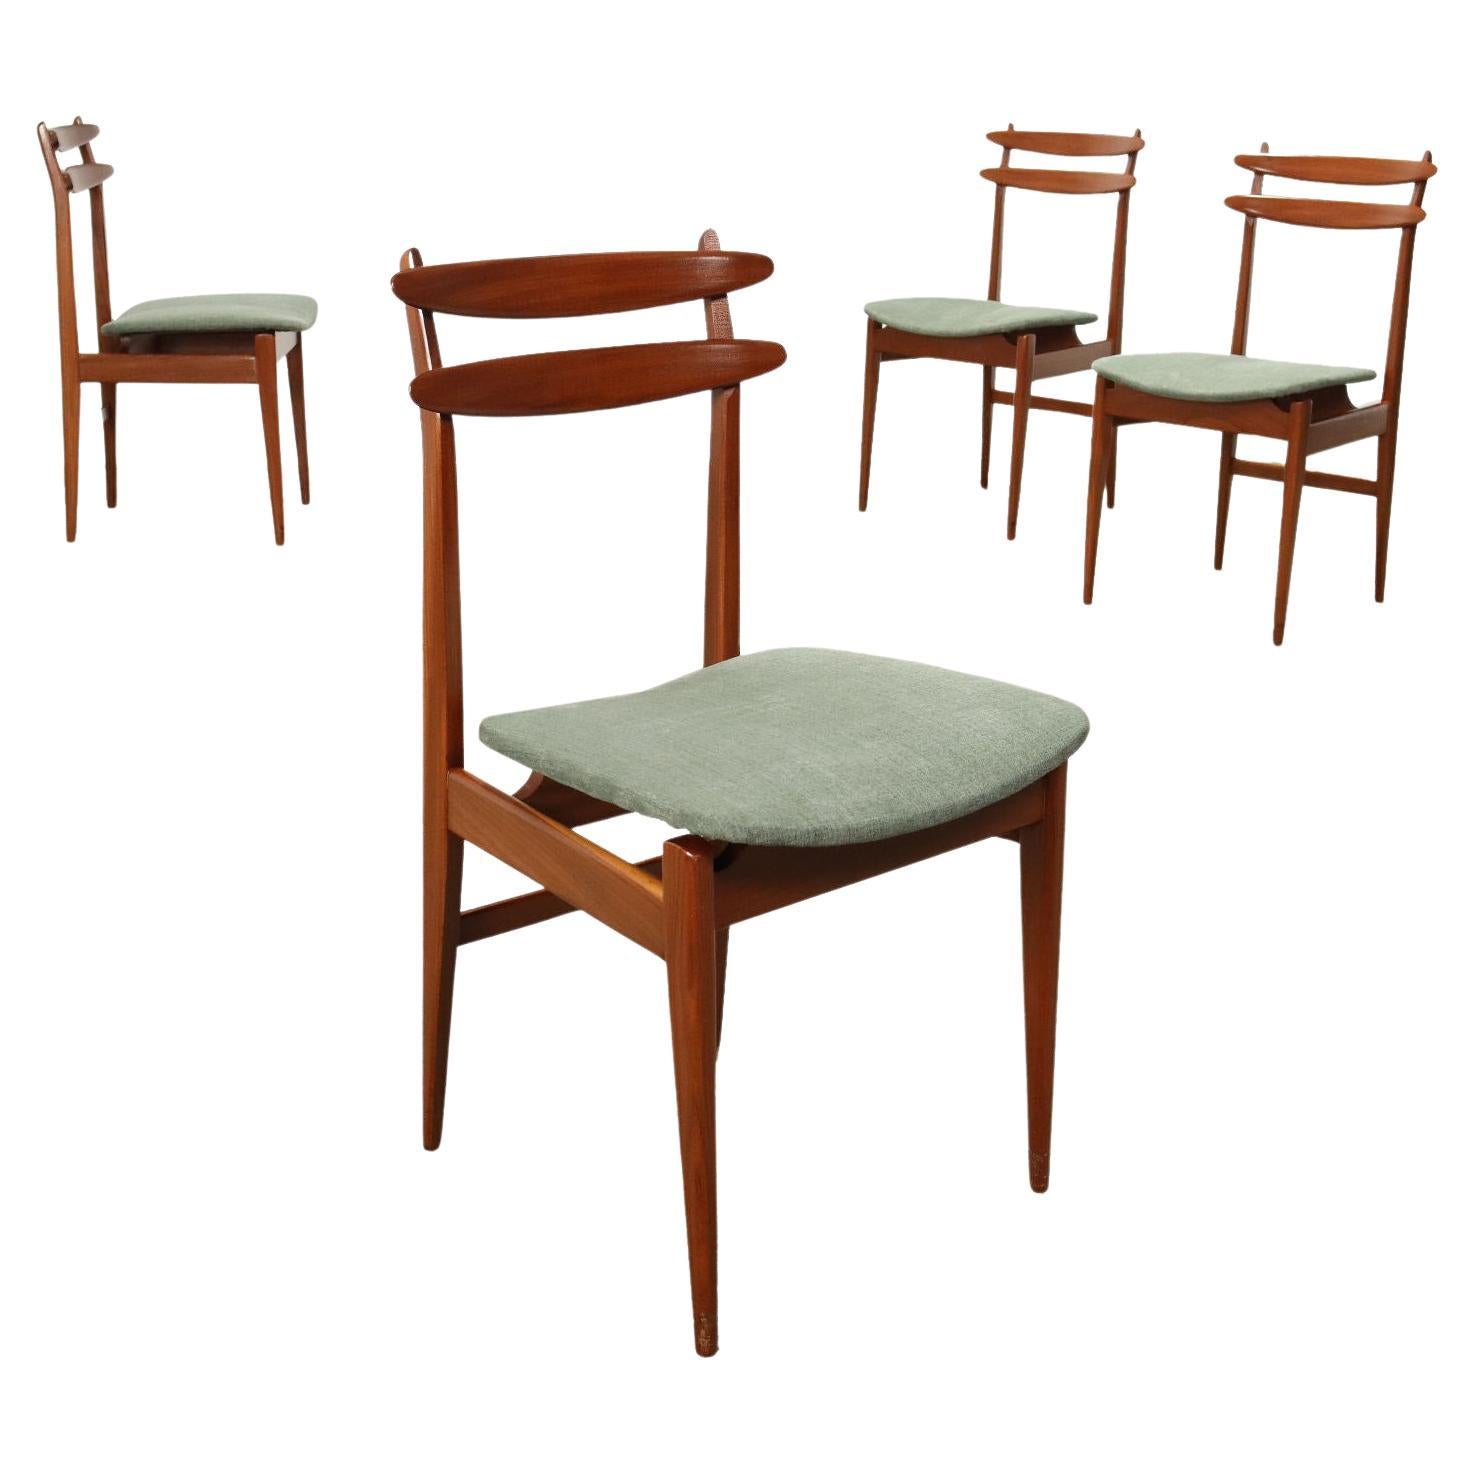 Group of 4 Wooden Chairs Italy 1950s-1960s